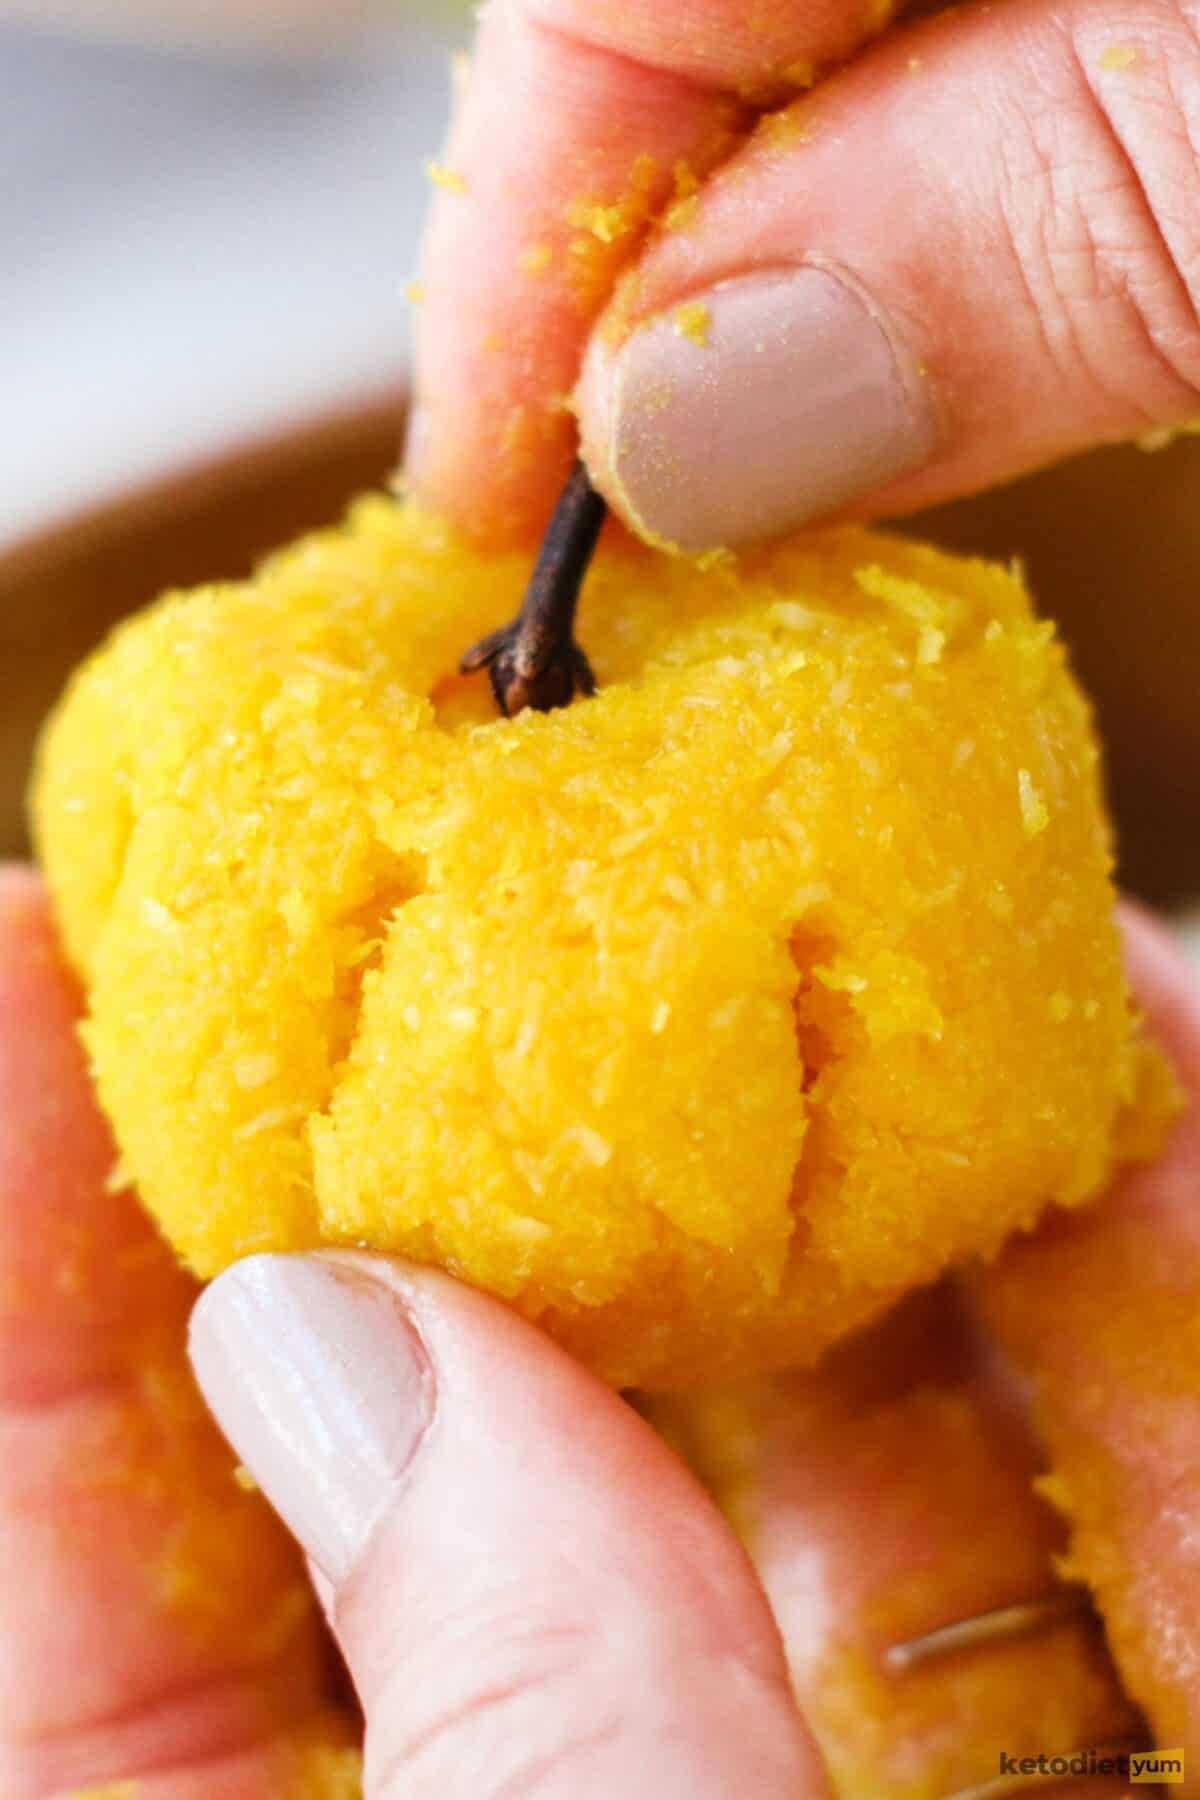 Hand holding a marzipan ball shaped into a pumpkin and placing a whole clove stick into the top as a decorative stem